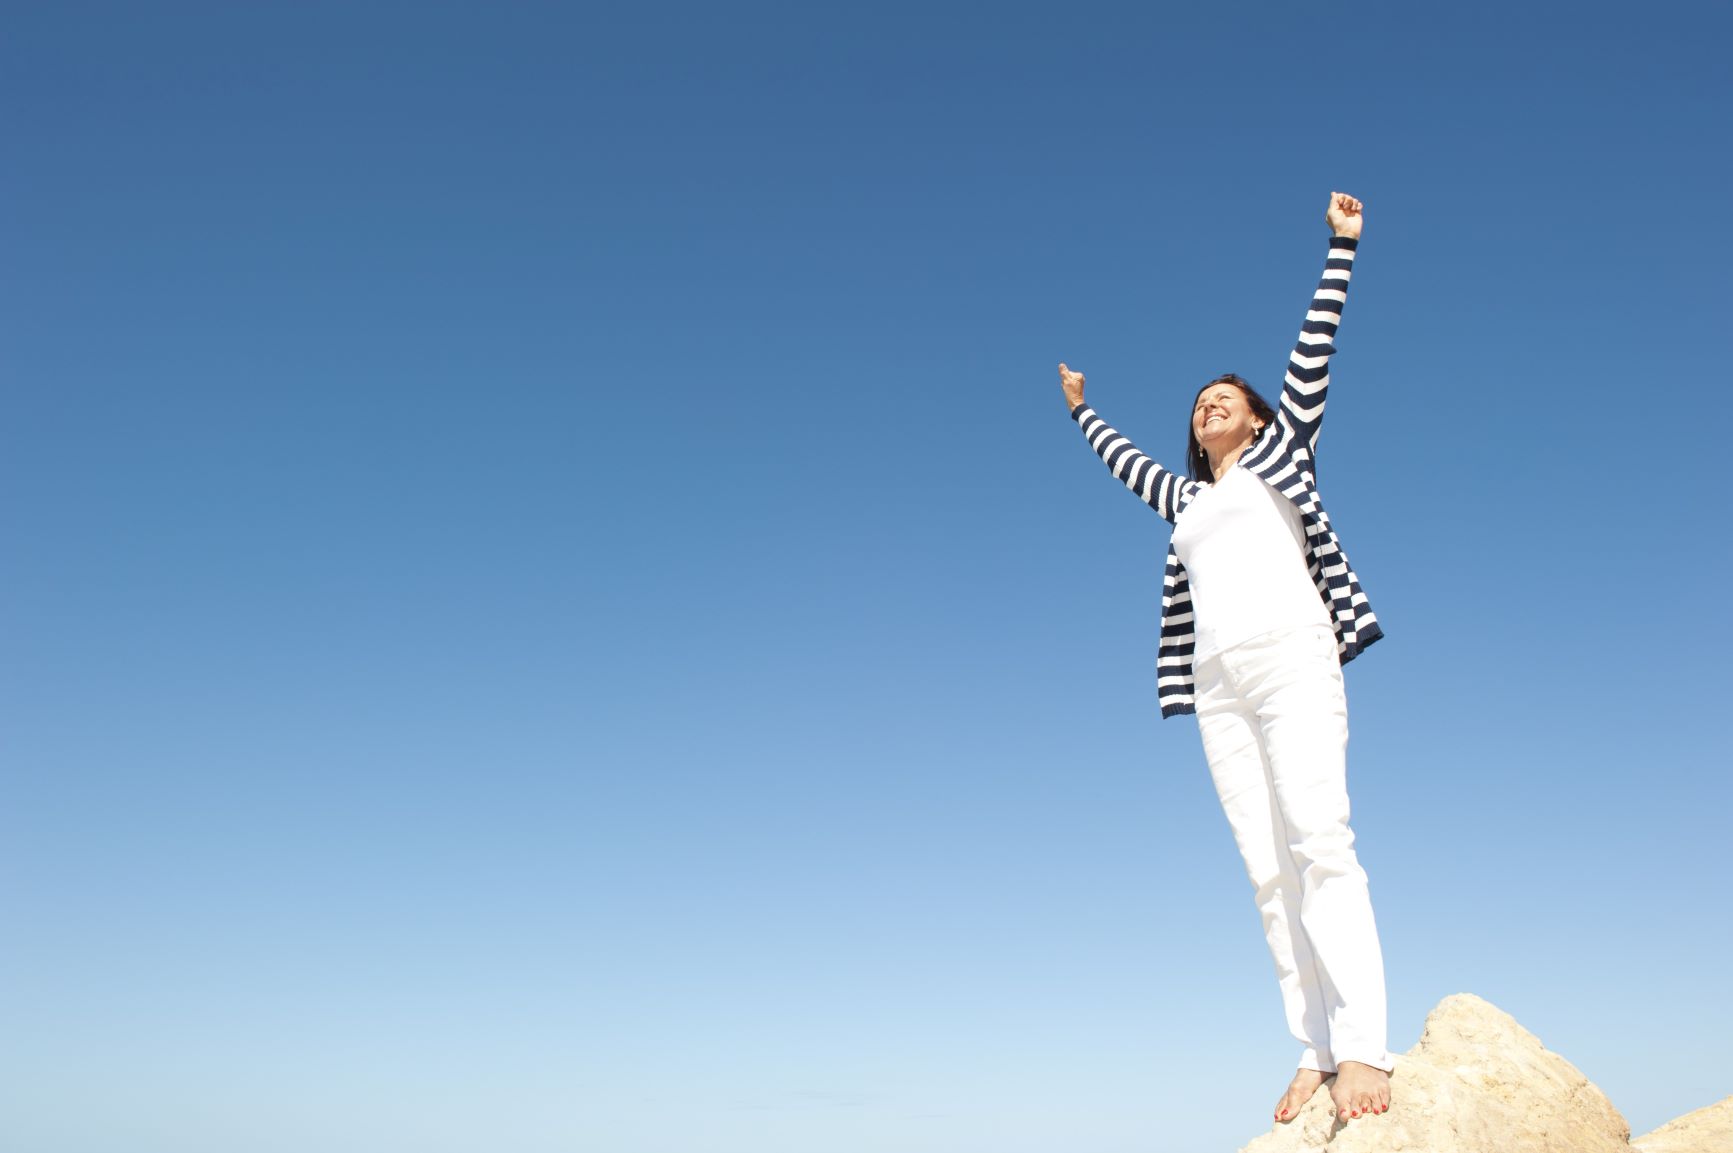 7 Amazing Benefits of Being Optimistic about Life